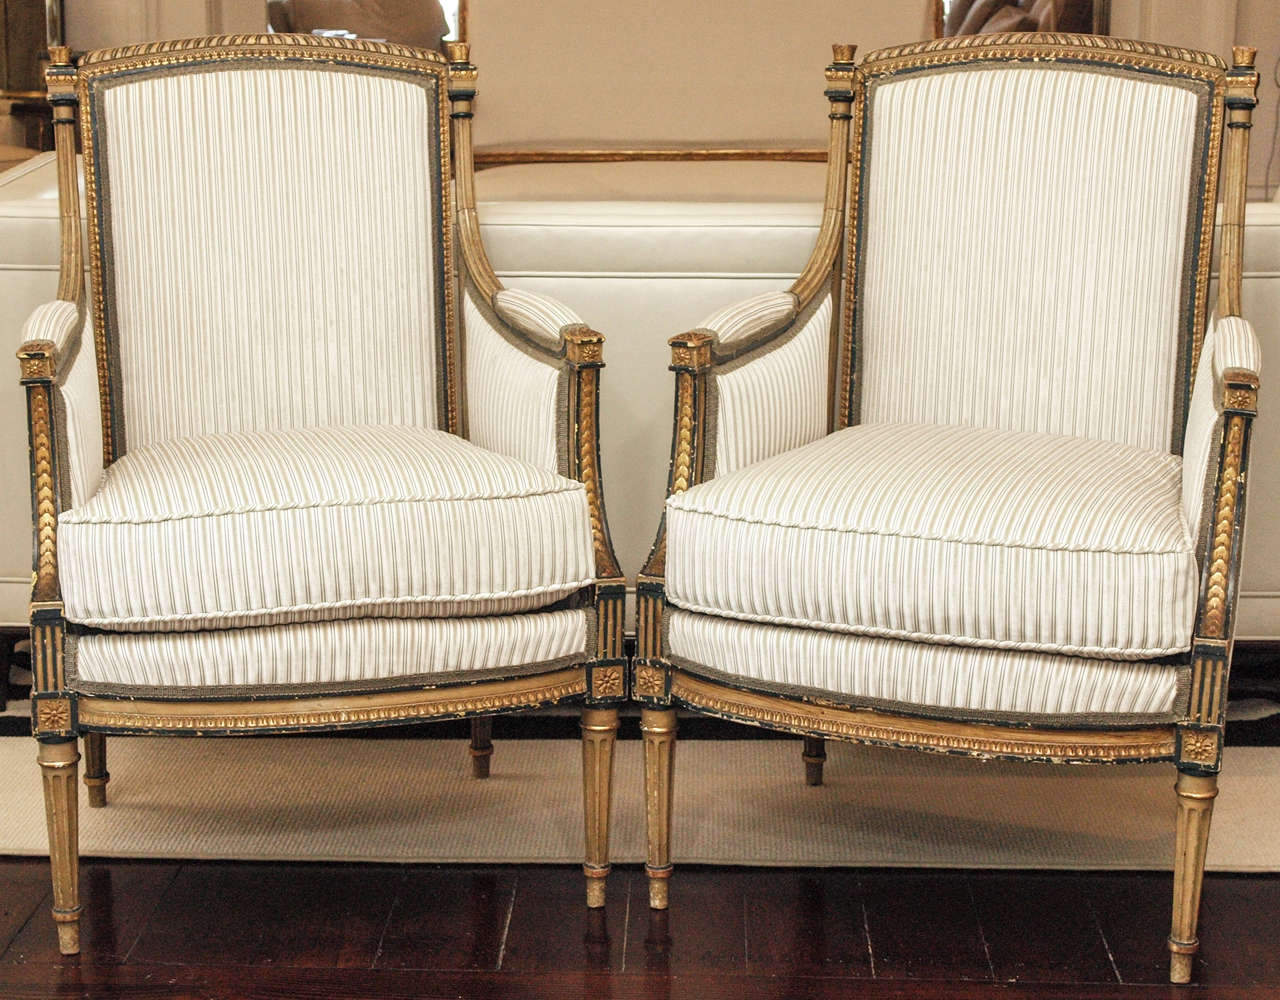 Two bergeres with ebonized and gilt frames, attractively carved and detailed; now upholstered in cream and taupe Manuel Canovas stripe; loose seat cushion